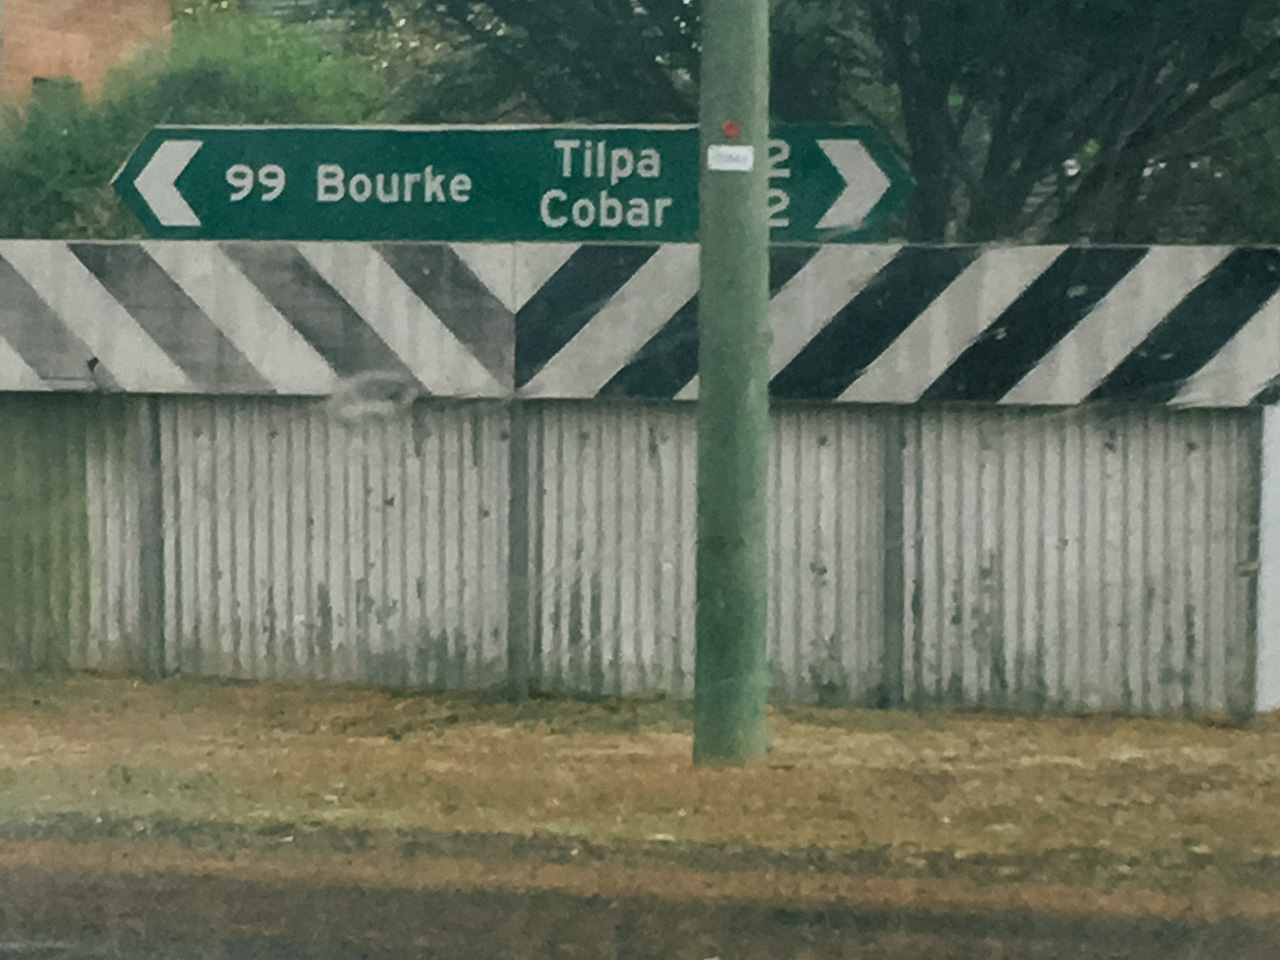 Bourke Left Tilpa Cobar Right Raining At Louth